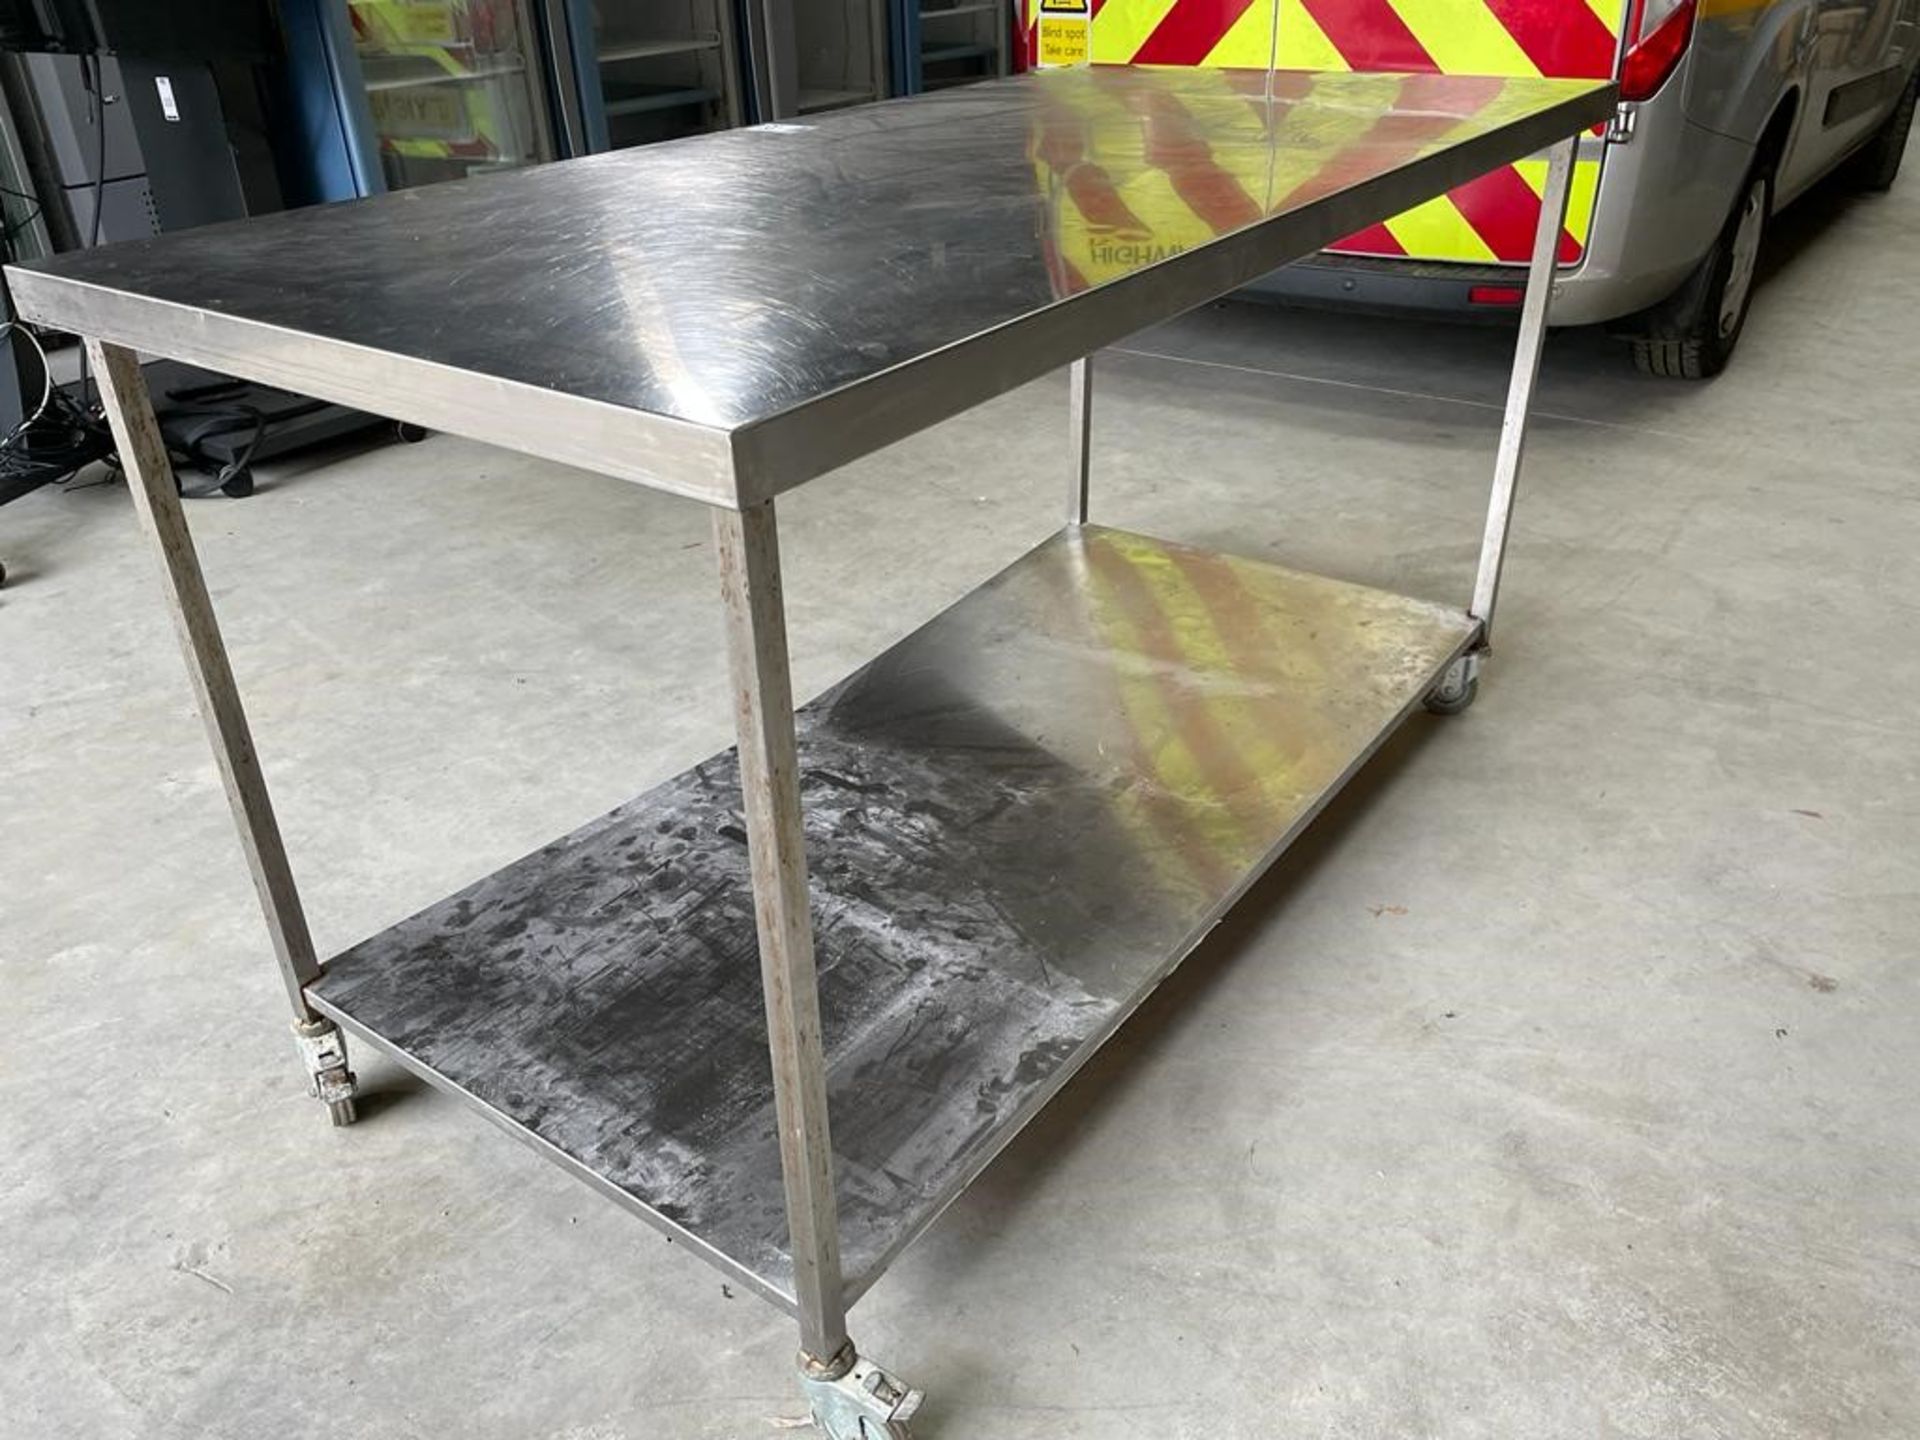 Stainless Steel Mobile Preparation Table with Undershelf (180cm (W) x 90cm (D) x 100cm (H)) (Library